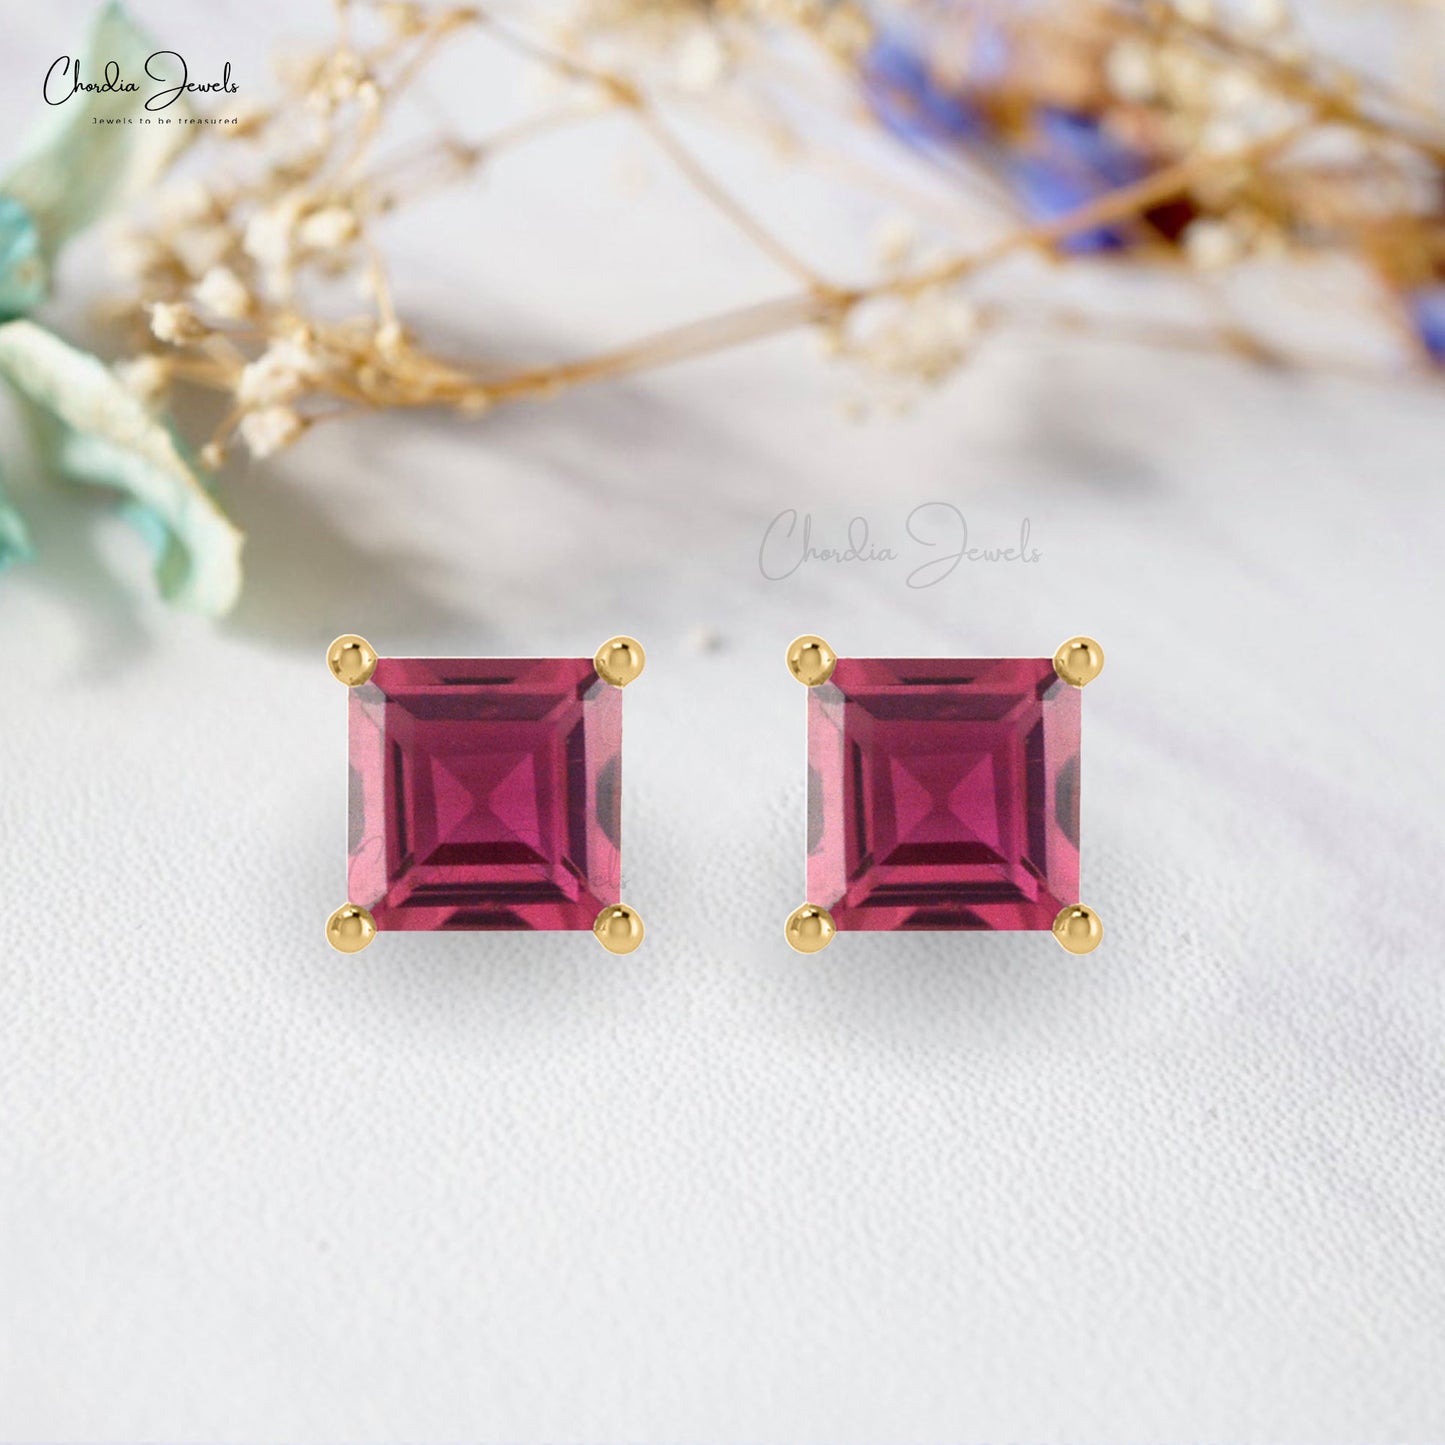 Load image into Gallery viewer, Natural Pink Tourmaline Studs Earring, 4mm Square Handmade Pink Tourmaline Studs, 14k Solid Gold Gemstone Stud Earrings Gift For Her
